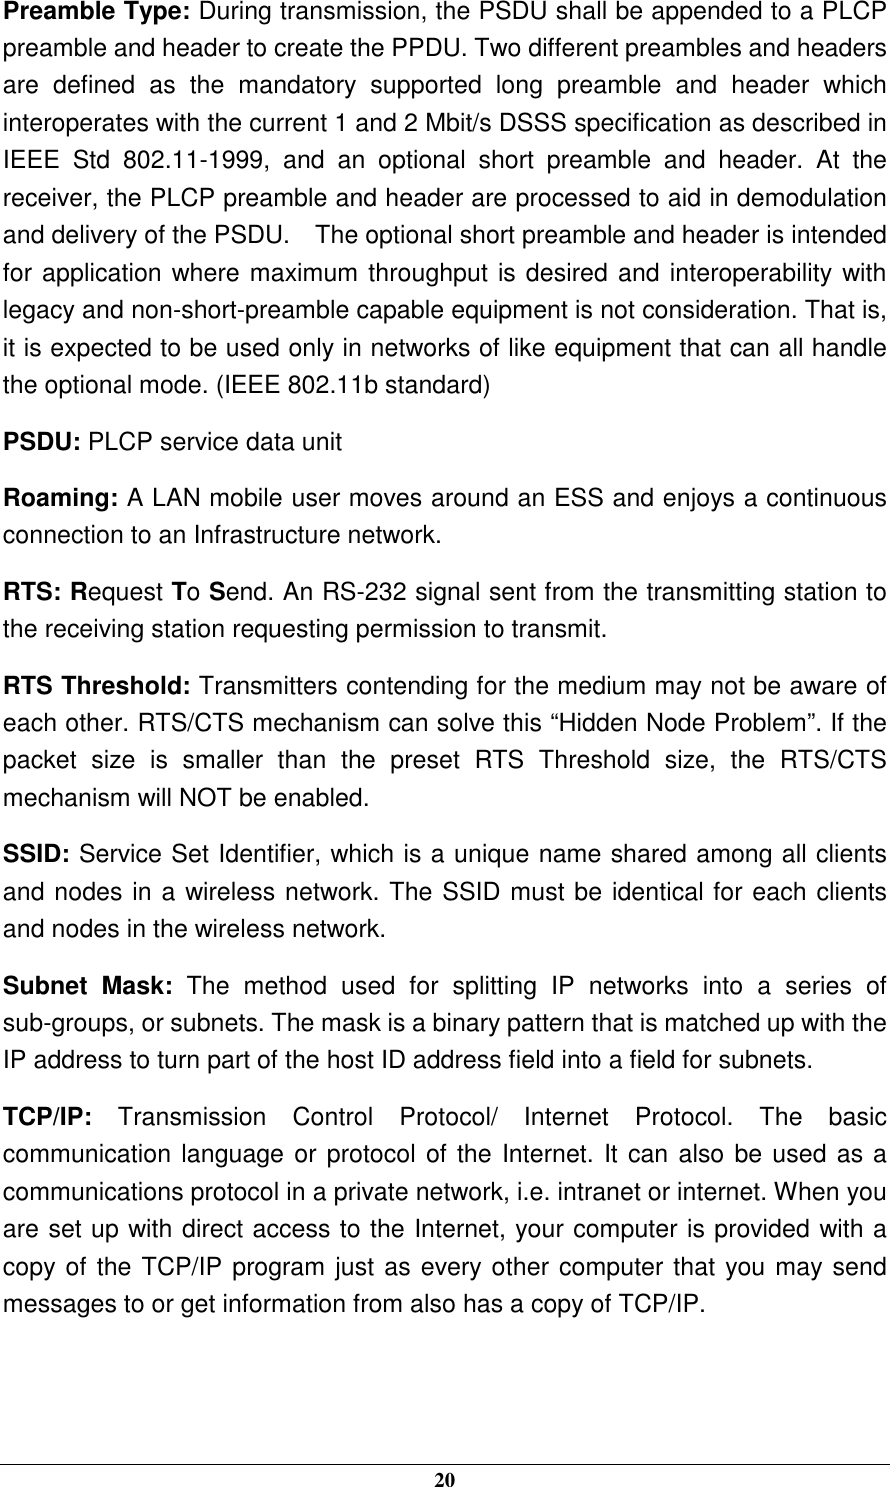  20 Preamble Type: During transmission, the PSDU shall be appended to a PLCP preamble and header to create the PPDU. Two different preambles and headers are  defined  as  the  mandatory  supported  long  preamble  and  header  which interoperates with the current 1 and 2 Mbit/s DSSS specification as described in IEEE  Std  802.11-1999,  and  an  optional  short  preamble  and  header.  At  the receiver, the PLCP preamble and header are processed to aid in demodulation and delivery of the PSDU.    The optional short preamble and header is intended for application where maximum throughput is desired and interoperability with legacy and non-short-preamble capable equipment is not consideration. That is, it is expected to be used only in networks of like equipment that can all handle the optional mode. (IEEE 802.11b standard) PSDU: PLCP service data unit Roaming: A LAN mobile user moves around an ESS and enjoys a continuous connection to an Infrastructure network. RTS: Request To Send. An RS-232 signal sent from the transmitting station to the receiving station requesting permission to transmit. RTS Threshold: Transmitters contending for the medium may not be aware of each other. RTS/CTS mechanism can solve this “Hidden Node Problem”. If the packet  size  is  smaller  than  the  preset  RTS  Threshold  size,  the  RTS/CTS mechanism will NOT be enabled. SSID: Service Set Identifier, which is a unique name shared among all clients and nodes in a wireless network. The SSID must be identical for each clients and nodes in the wireless network. Subnet  Mask:  The  method  used  for  splitting  IP  networks  into  a  series  of sub-groups, or subnets. The mask is a binary pattern that is matched up with the IP address to turn part of the host ID address field into a field for subnets. TCP/IP:  Transmission  Control  Protocol/  Internet  Protocol.  The  basic communication language or protocol of the Internet. It can also be used as a communications protocol in a private network, i.e. intranet or internet. When you are set up with direct access to the Internet, your computer is provided with a copy of the TCP/IP program just as every other computer that you may send messages to or get information from also has a copy of TCP/IP.   